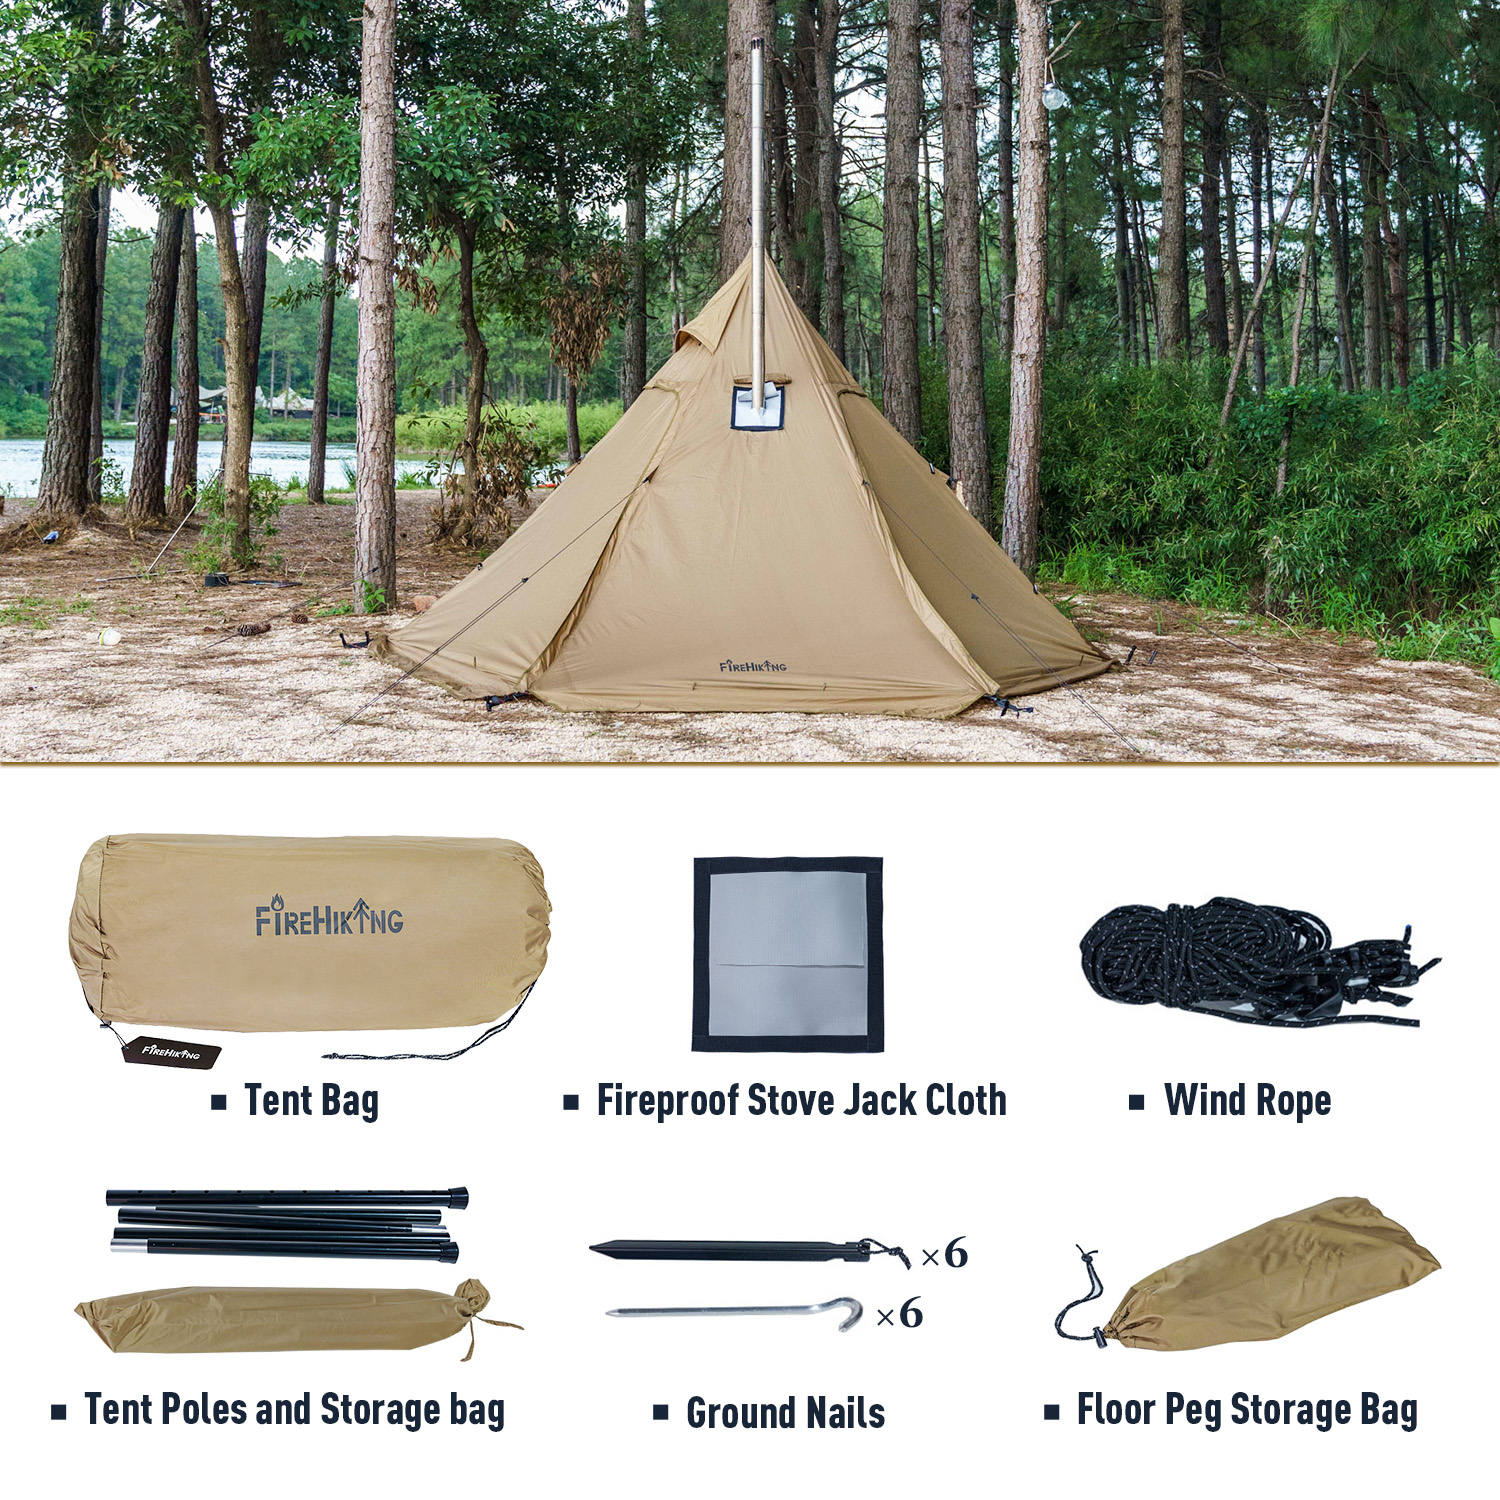 pack Zeker precedent FireHiking LEVA Hot Tent 2-4 Persons Waterproof Teepee Tent with Stove Hole  and Half Inner Mesh - US$ 219.00 - www.firehiking.com